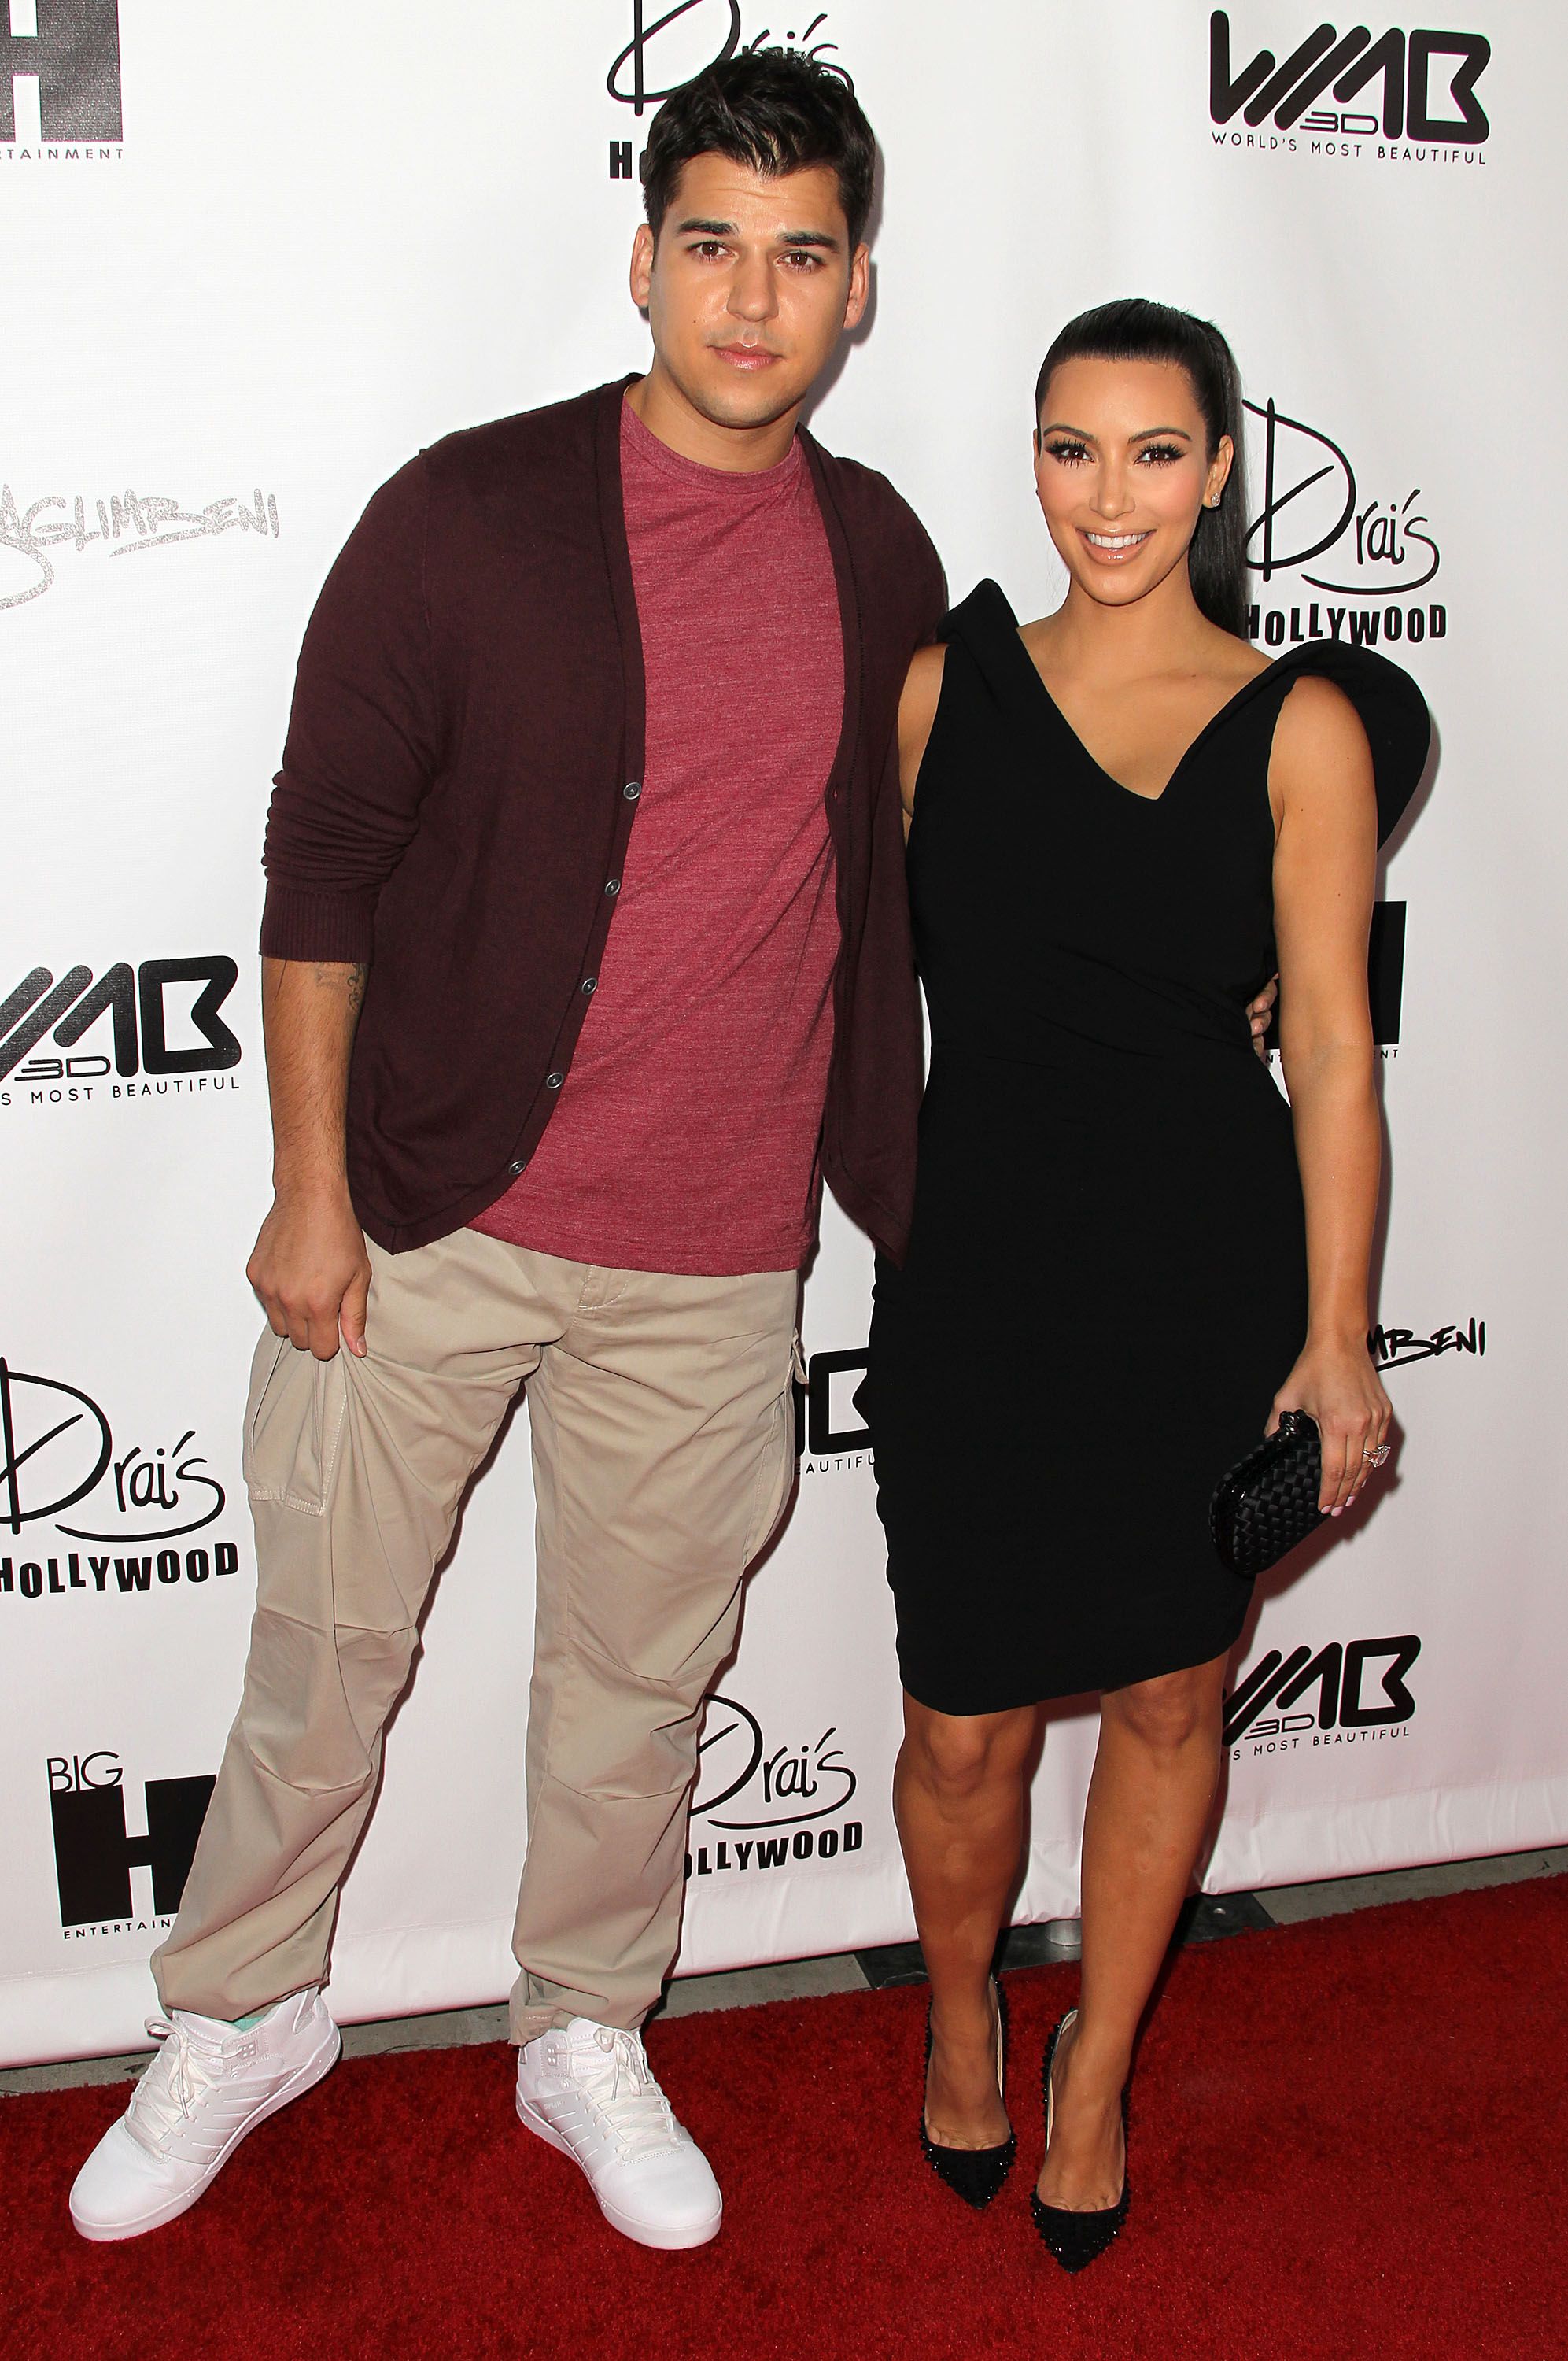 Rob Kardashian and Kim Kardashian during the World's Most Beautiful Magazine launch event at Drai's Hollywood on August 10, 2011 in Hollywood, California. | Source: Getty Images